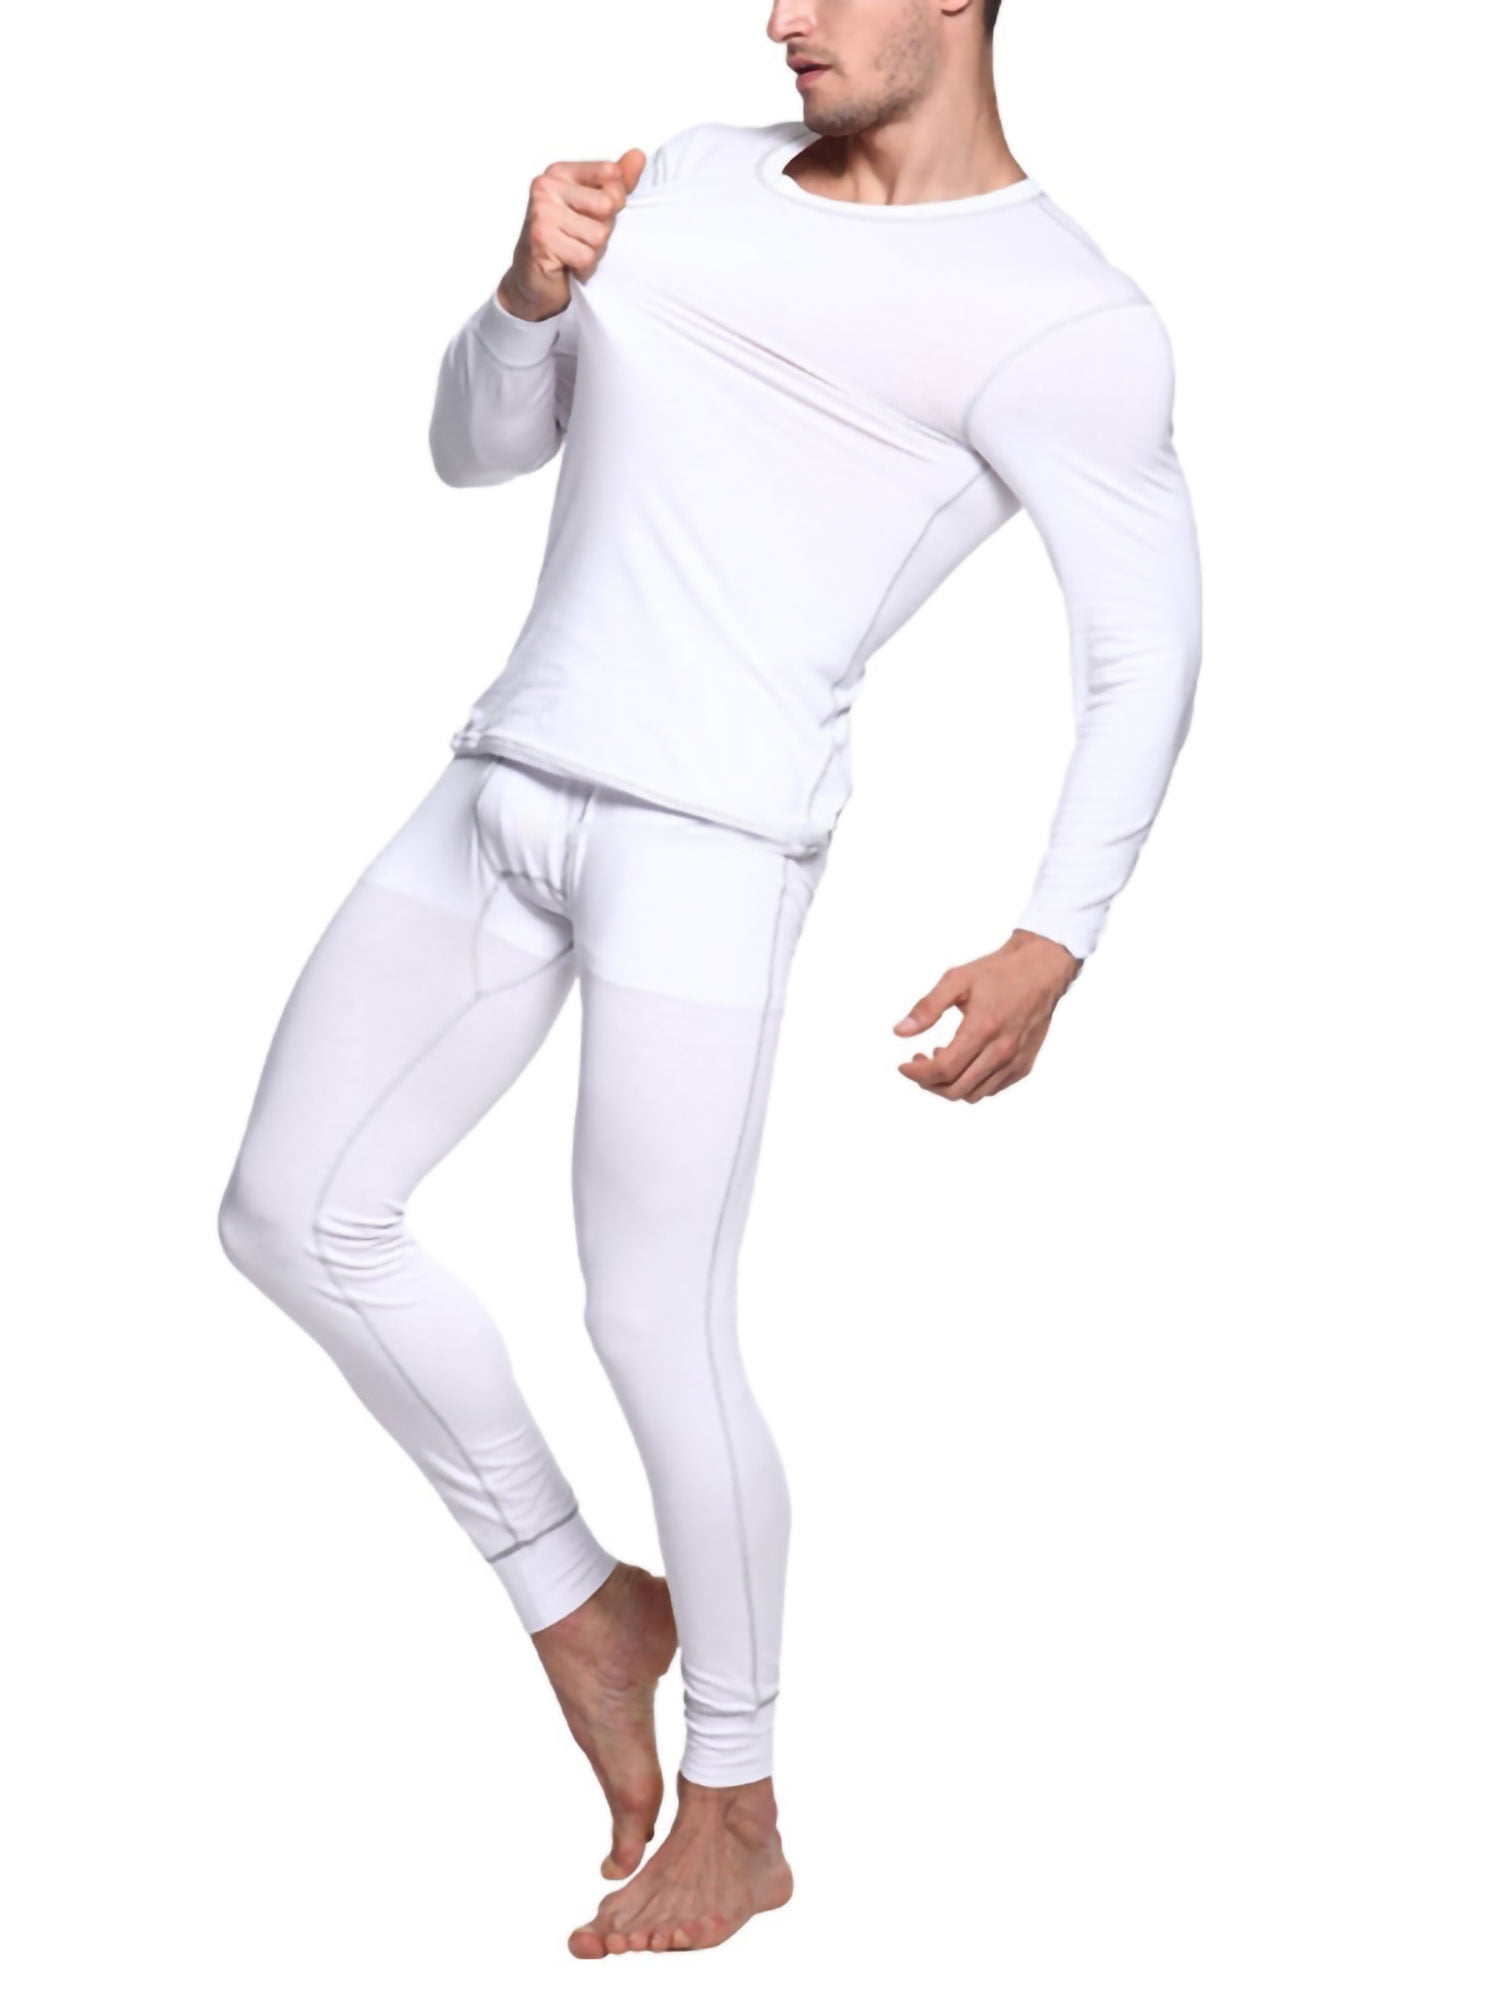 Mens Winter Underwear Base Layer Compression Long Johns Thermal Top & Bottom Set 